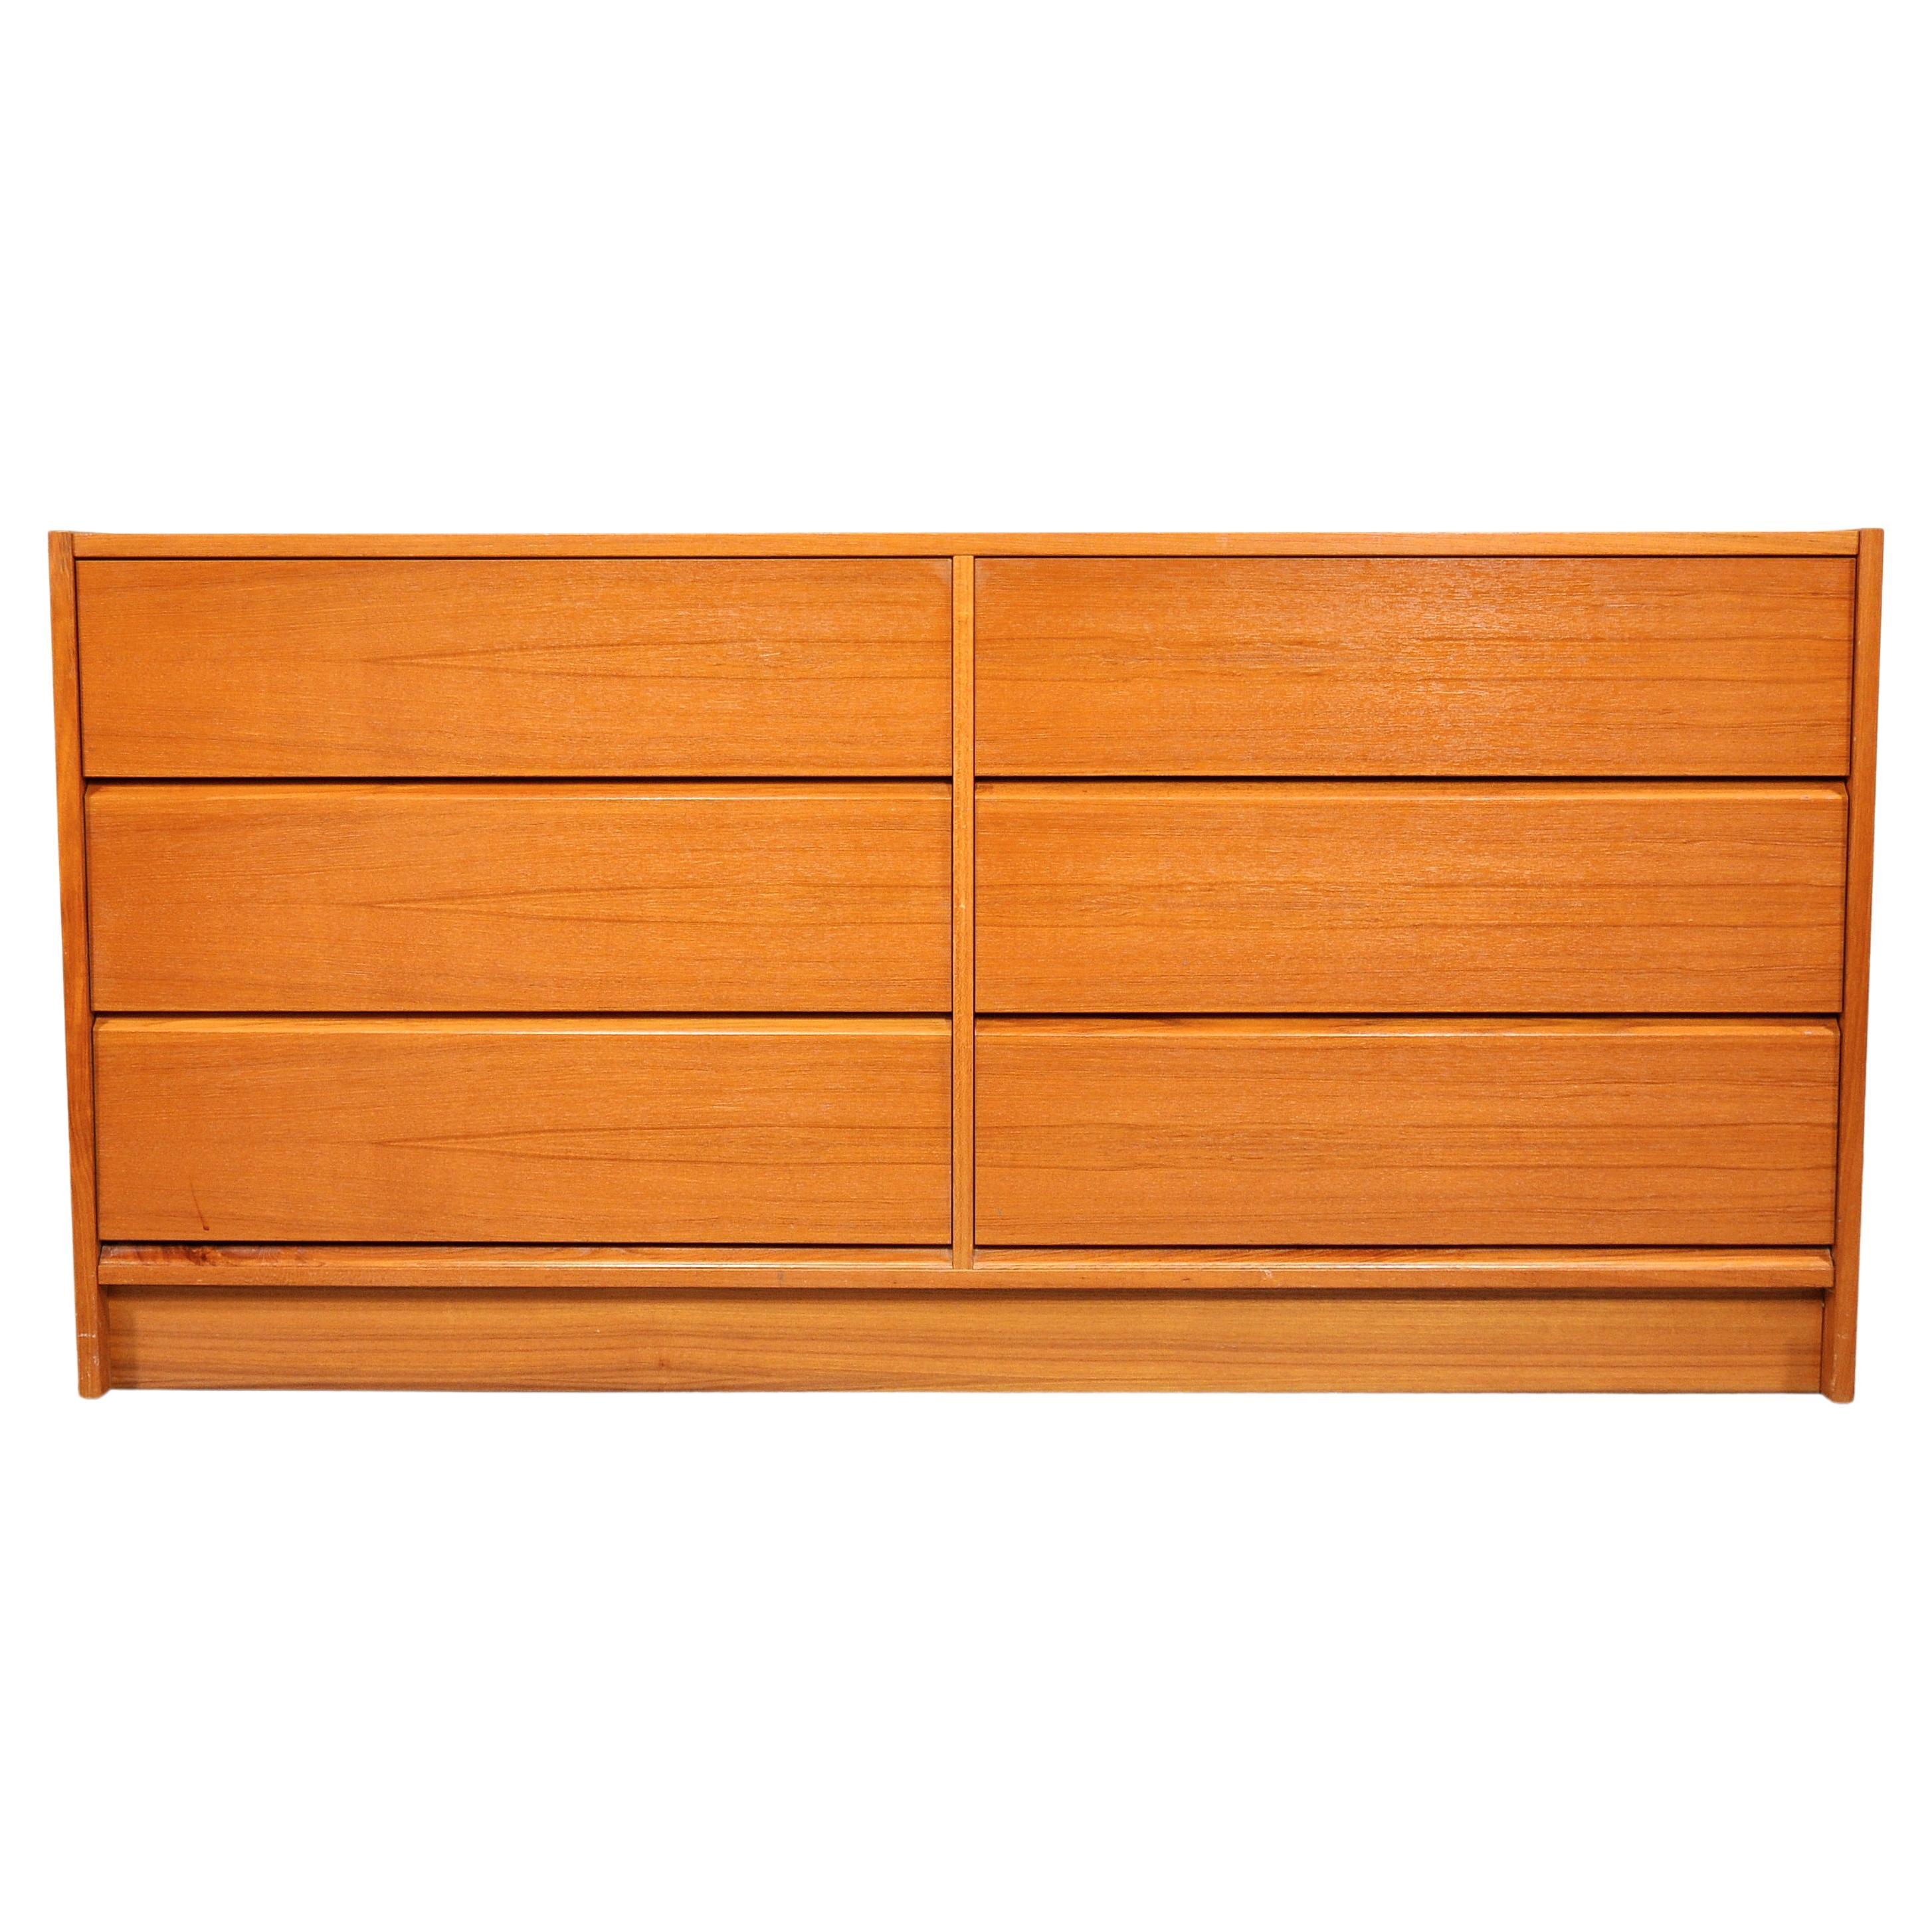 A vintage Mid-Century Modern teak double dresser from Denmark with beautiful wood grain. Both gorgeous and functional, this Scandinavian Modern chest of drawers dates from the 1970s. With 6 large drawers, it provides a ton of storage space. The